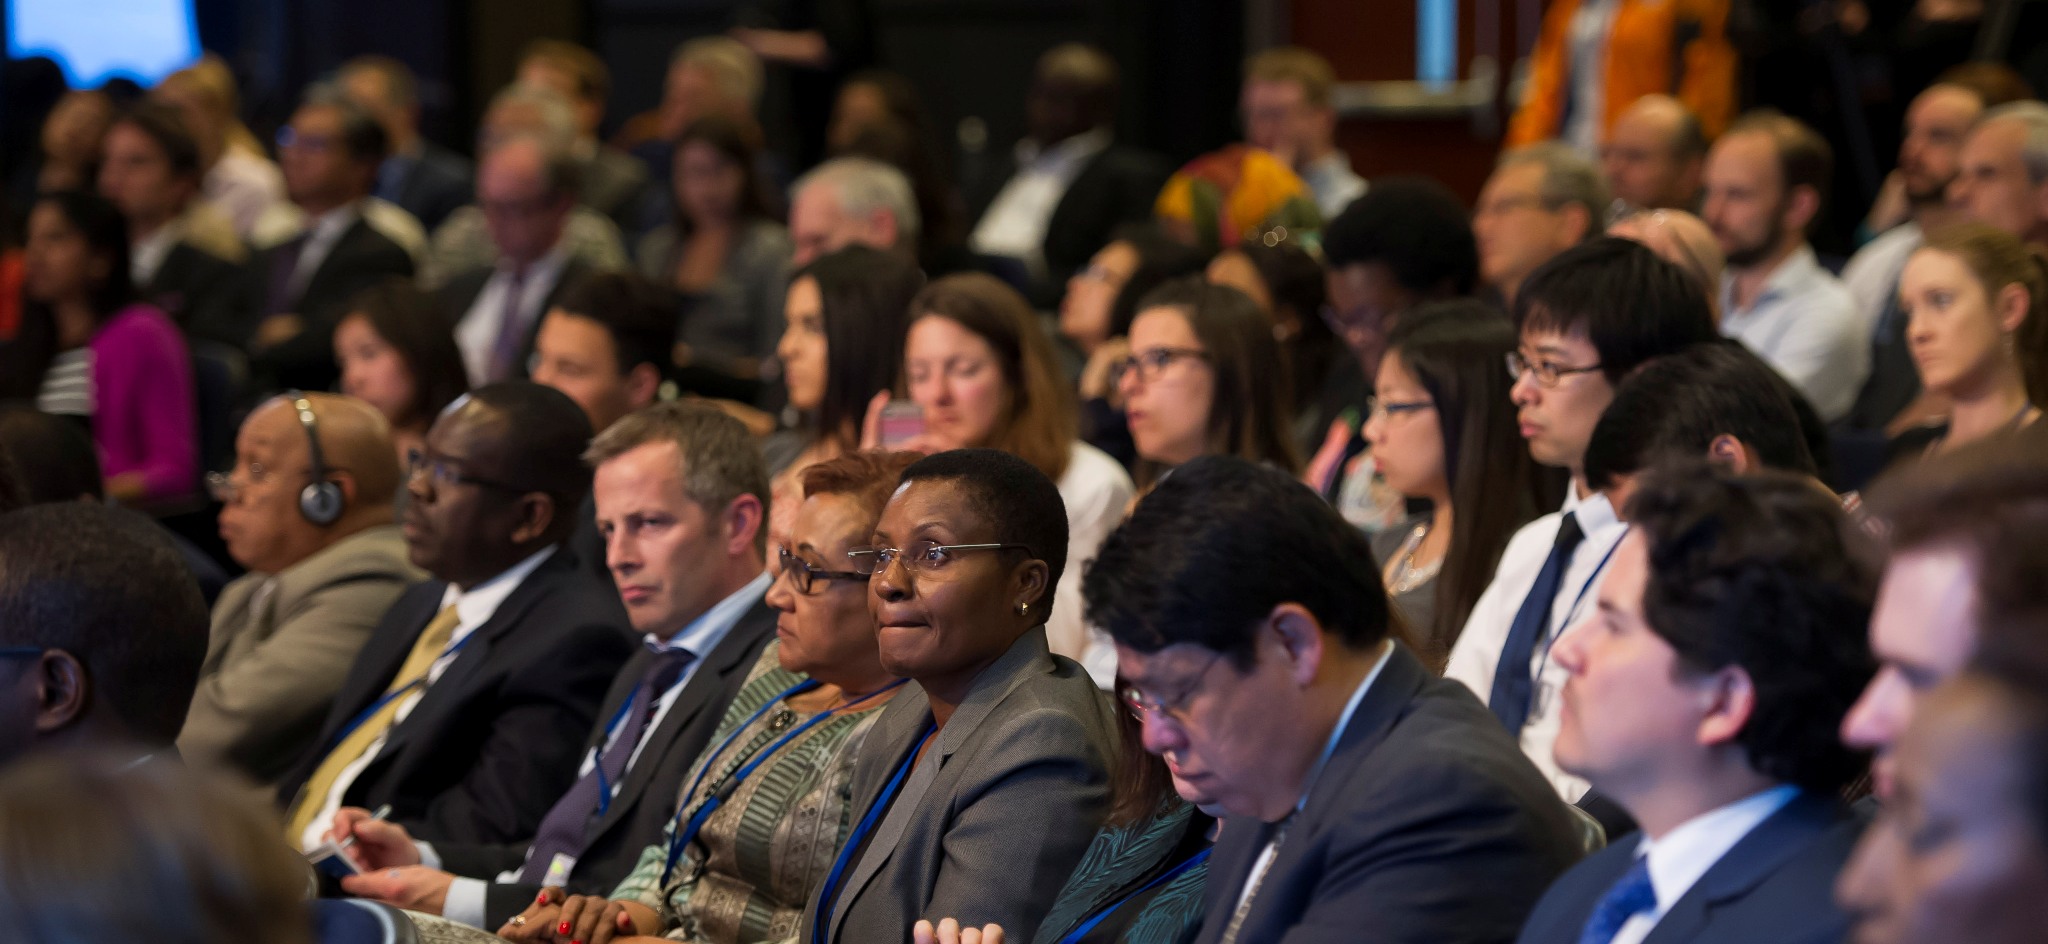 2015 Spring Meetings IMF Seminar on Financing for Development: The Way Forward